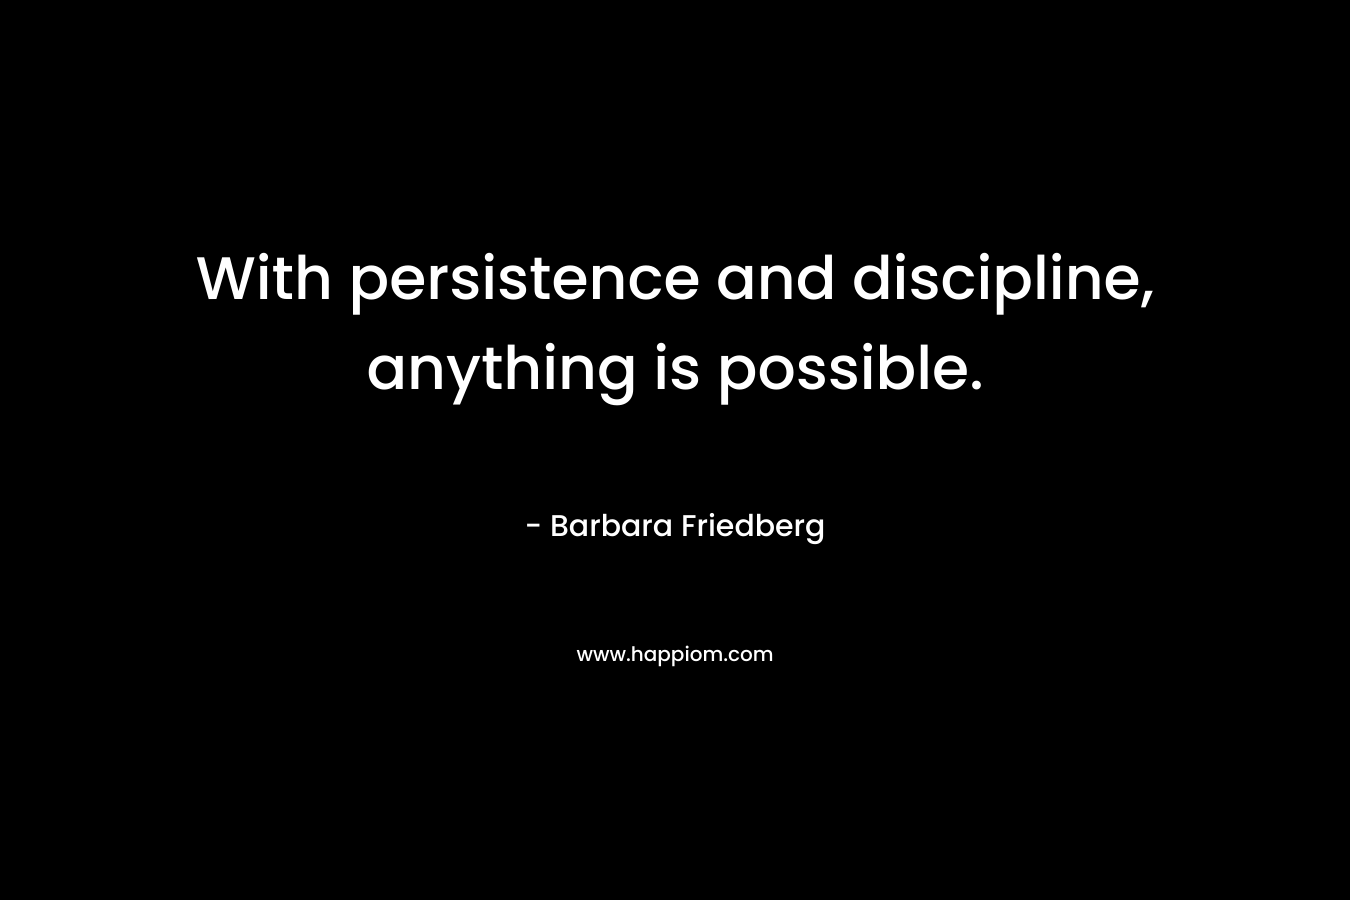 With persistence and discipline, anything is possible.